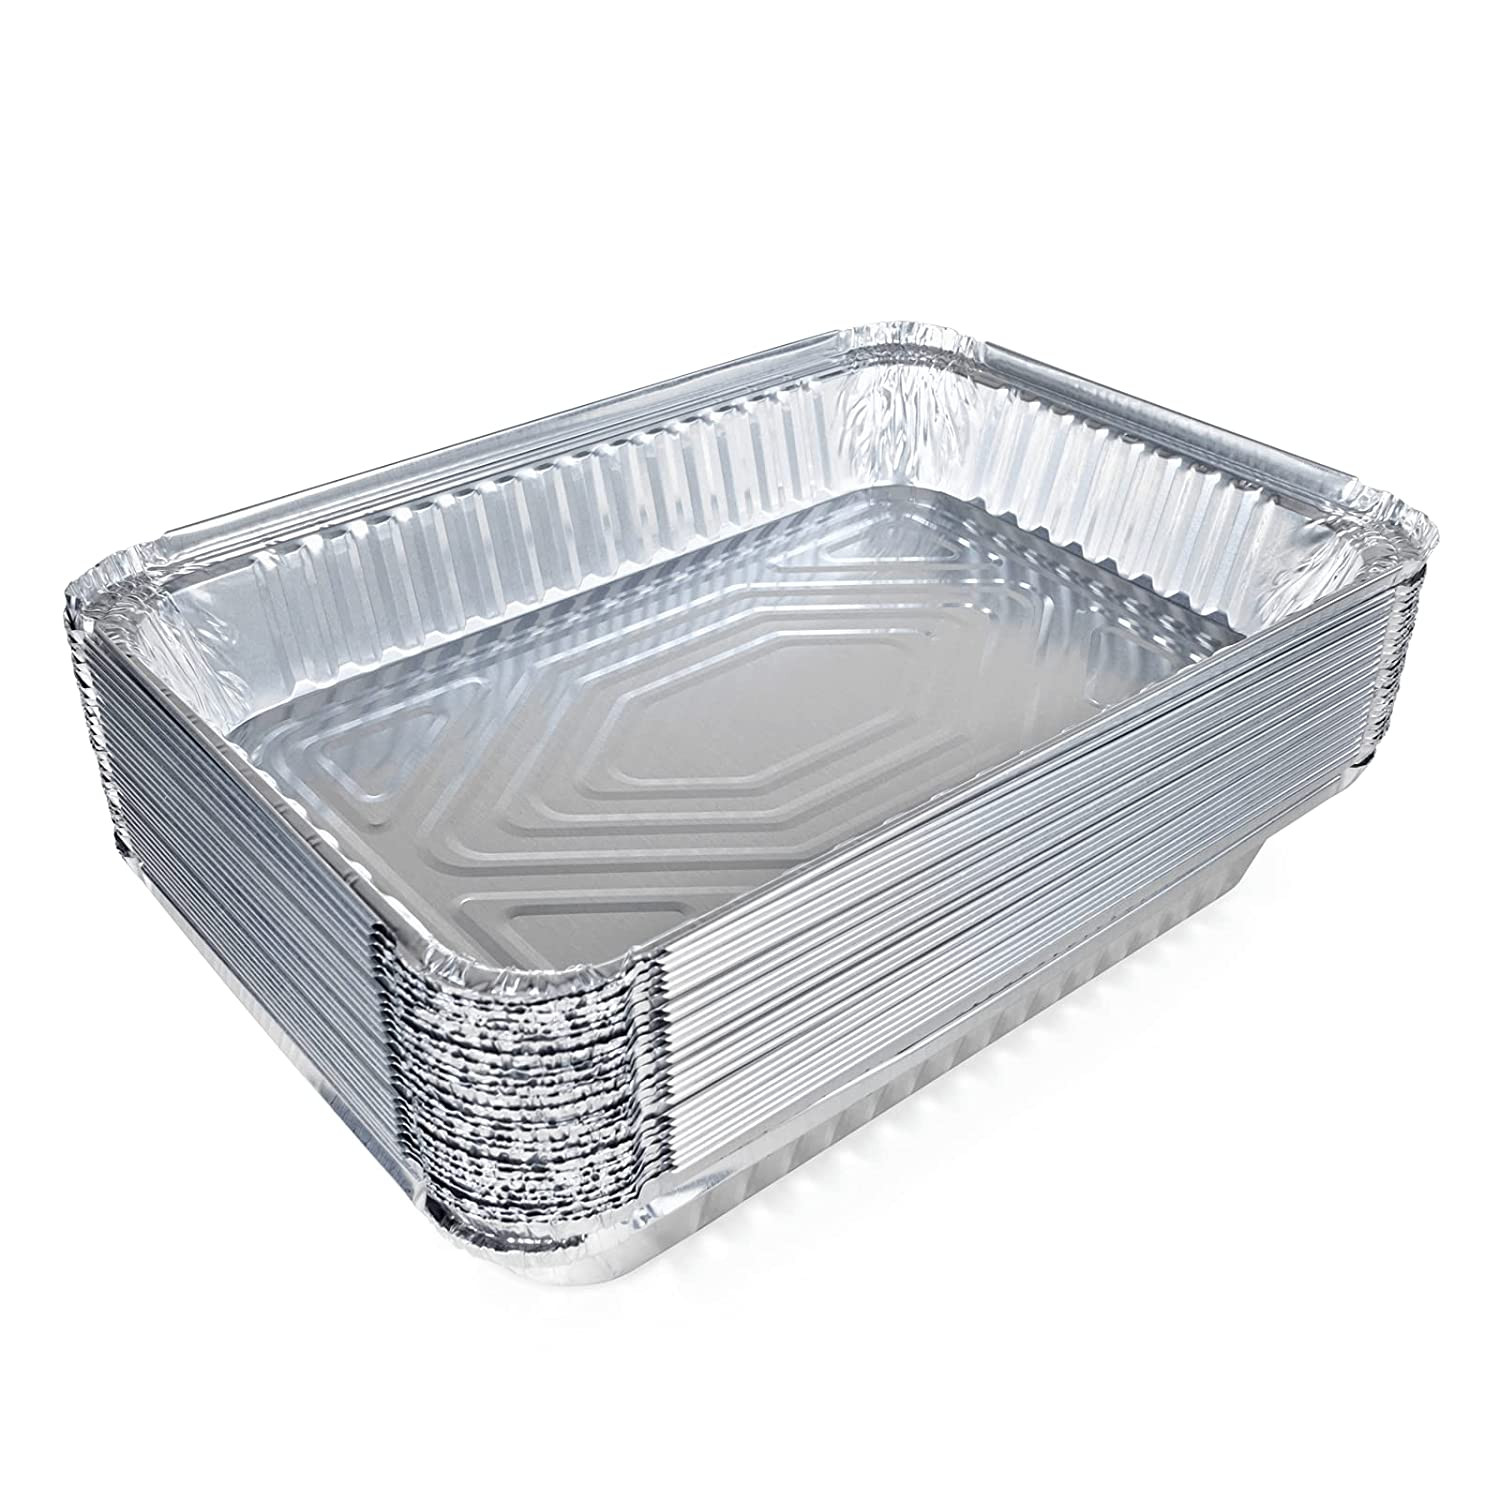 https://idlpack.com/image/cache/catalog/Products/Foil%20Pans%20and%20Trays/716f3wCBthL._SL1500_-1500x1500.jpg